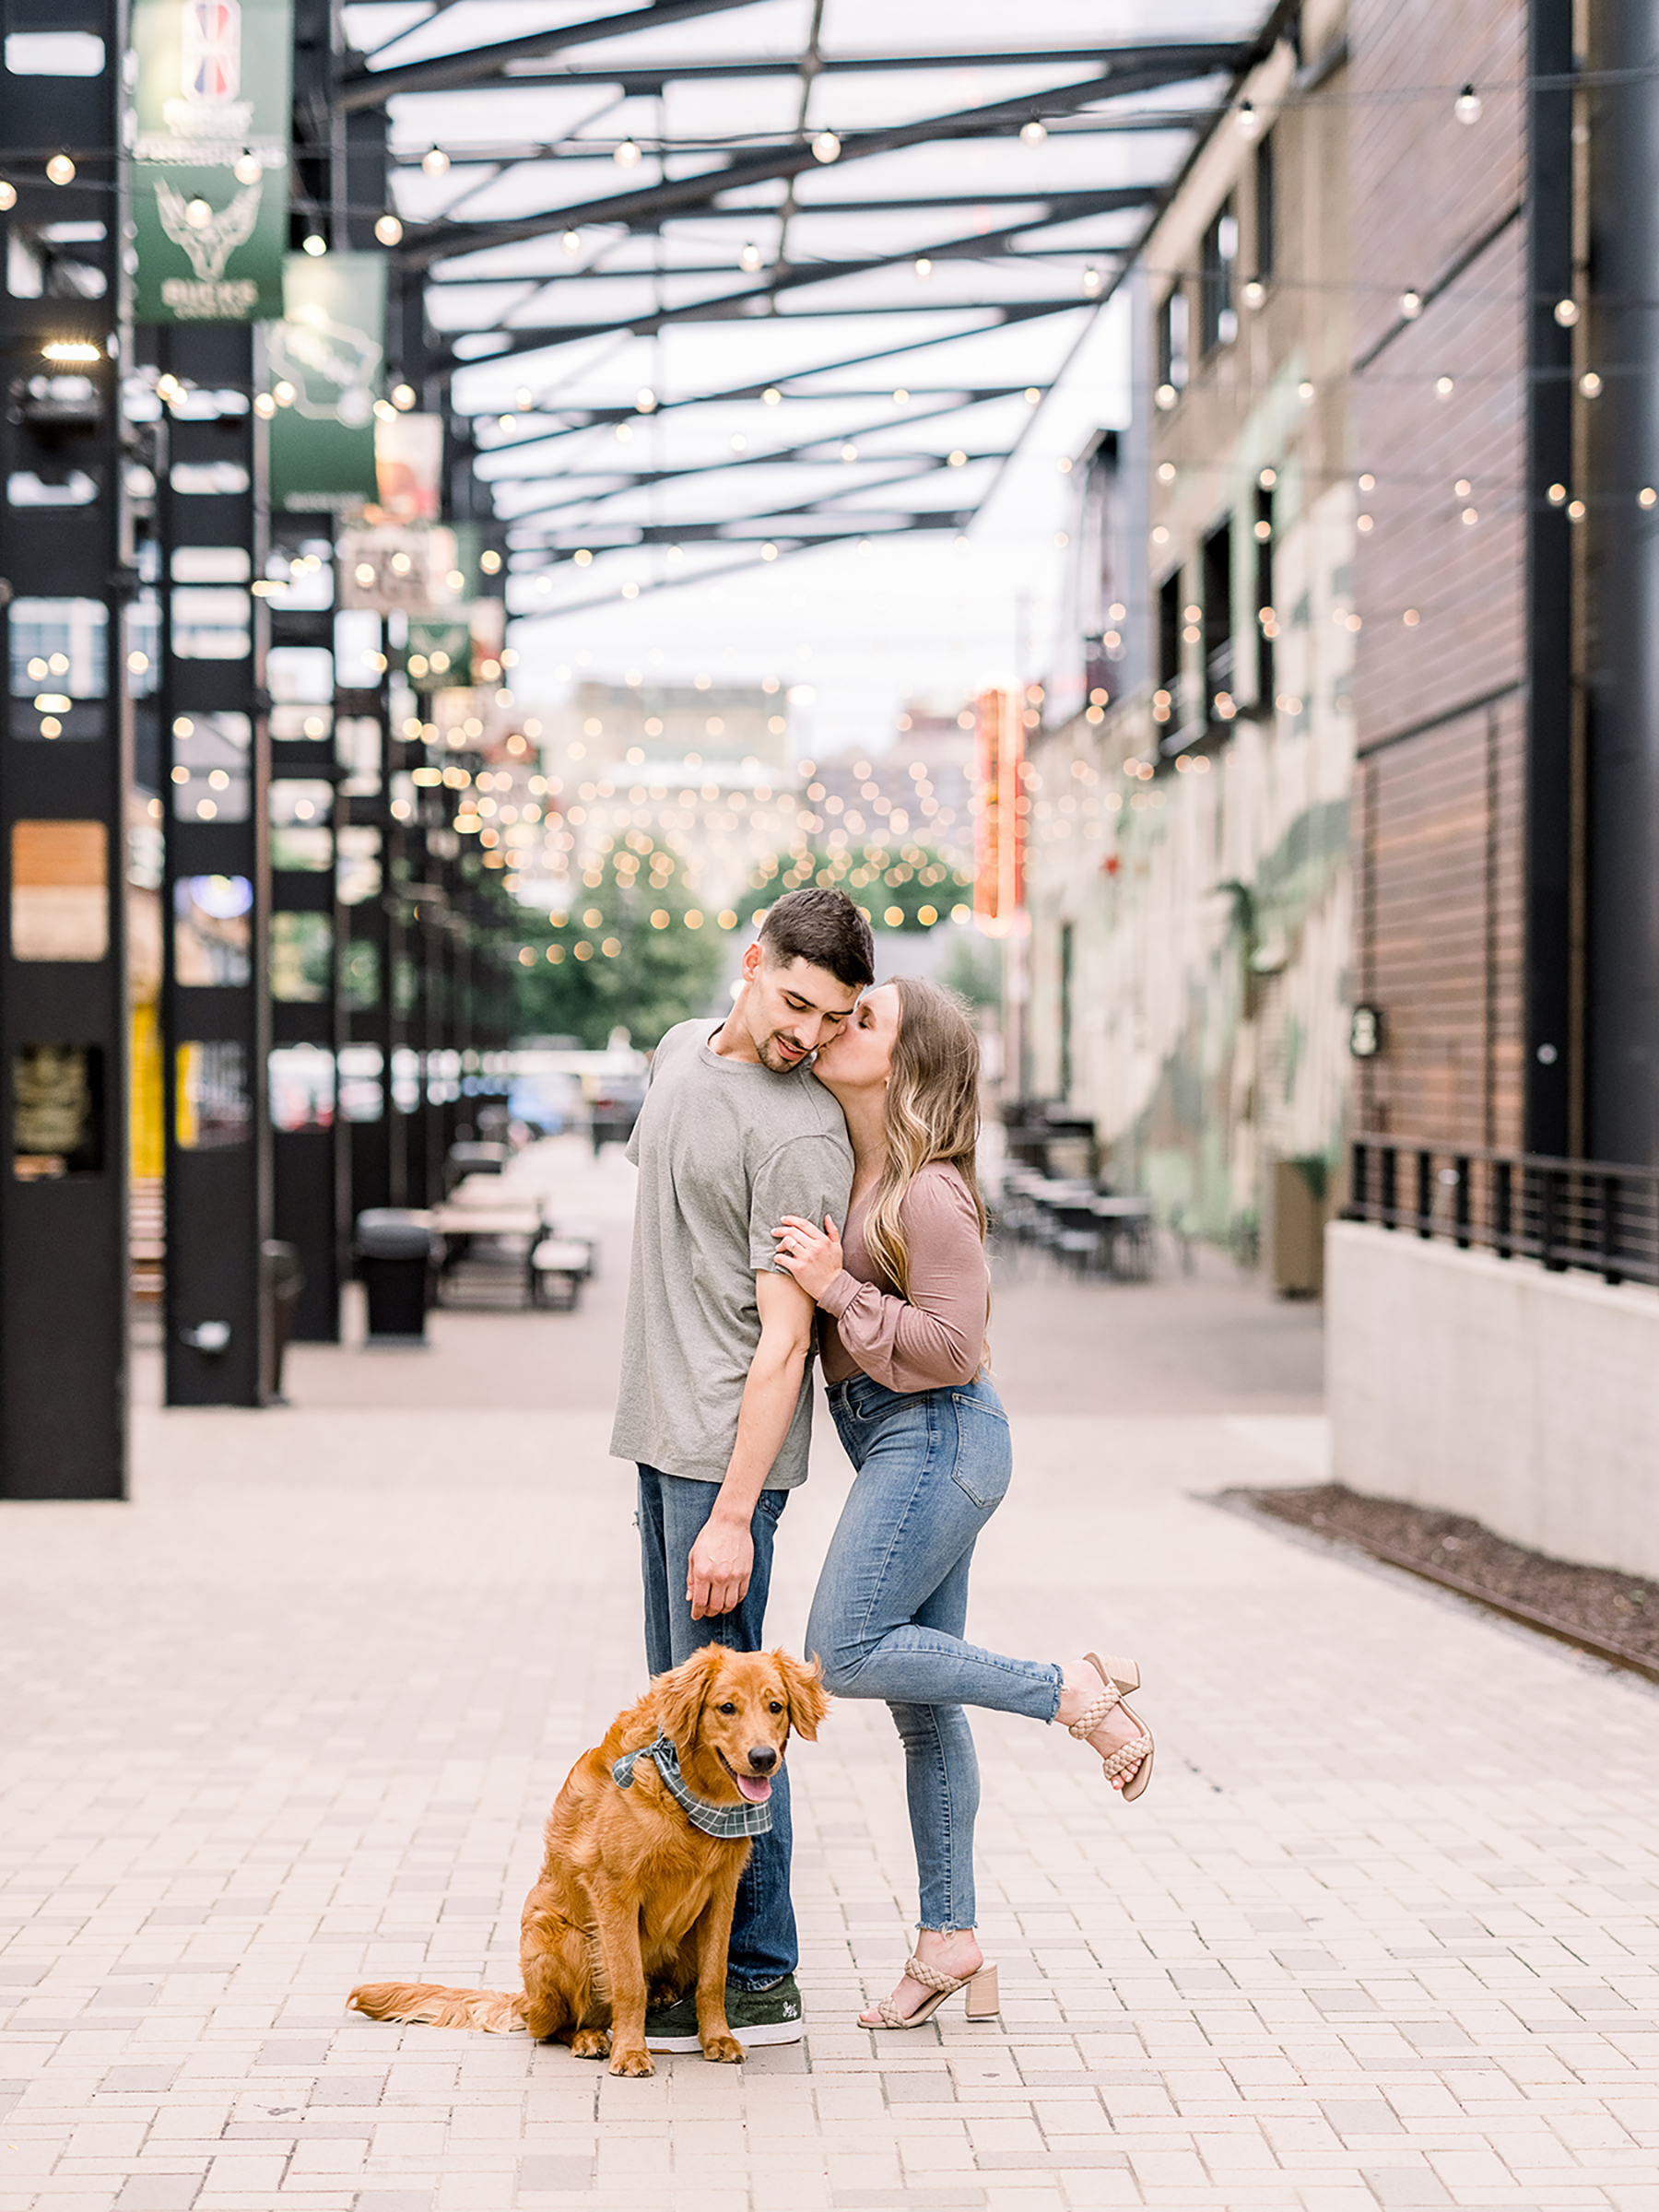 Downtown Milwaukee, WI Engagement Photographers